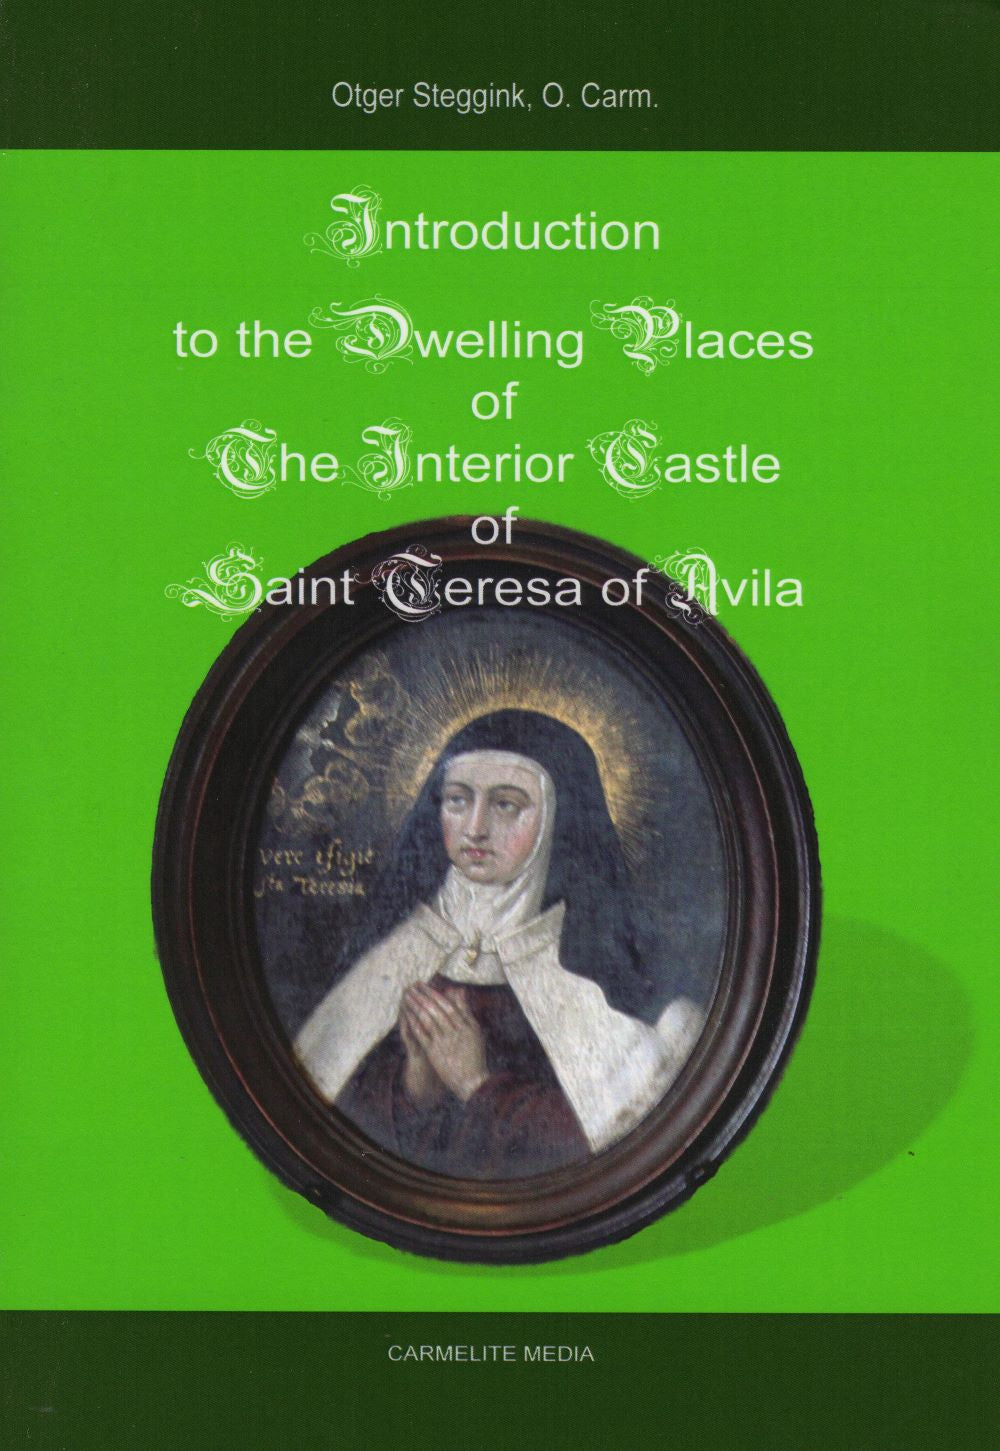 INTRODUCTION TO THE DWELLING PLACES OF THE INTERIOR CASTLE OF SAINT TERESA OF AVILA (2015)